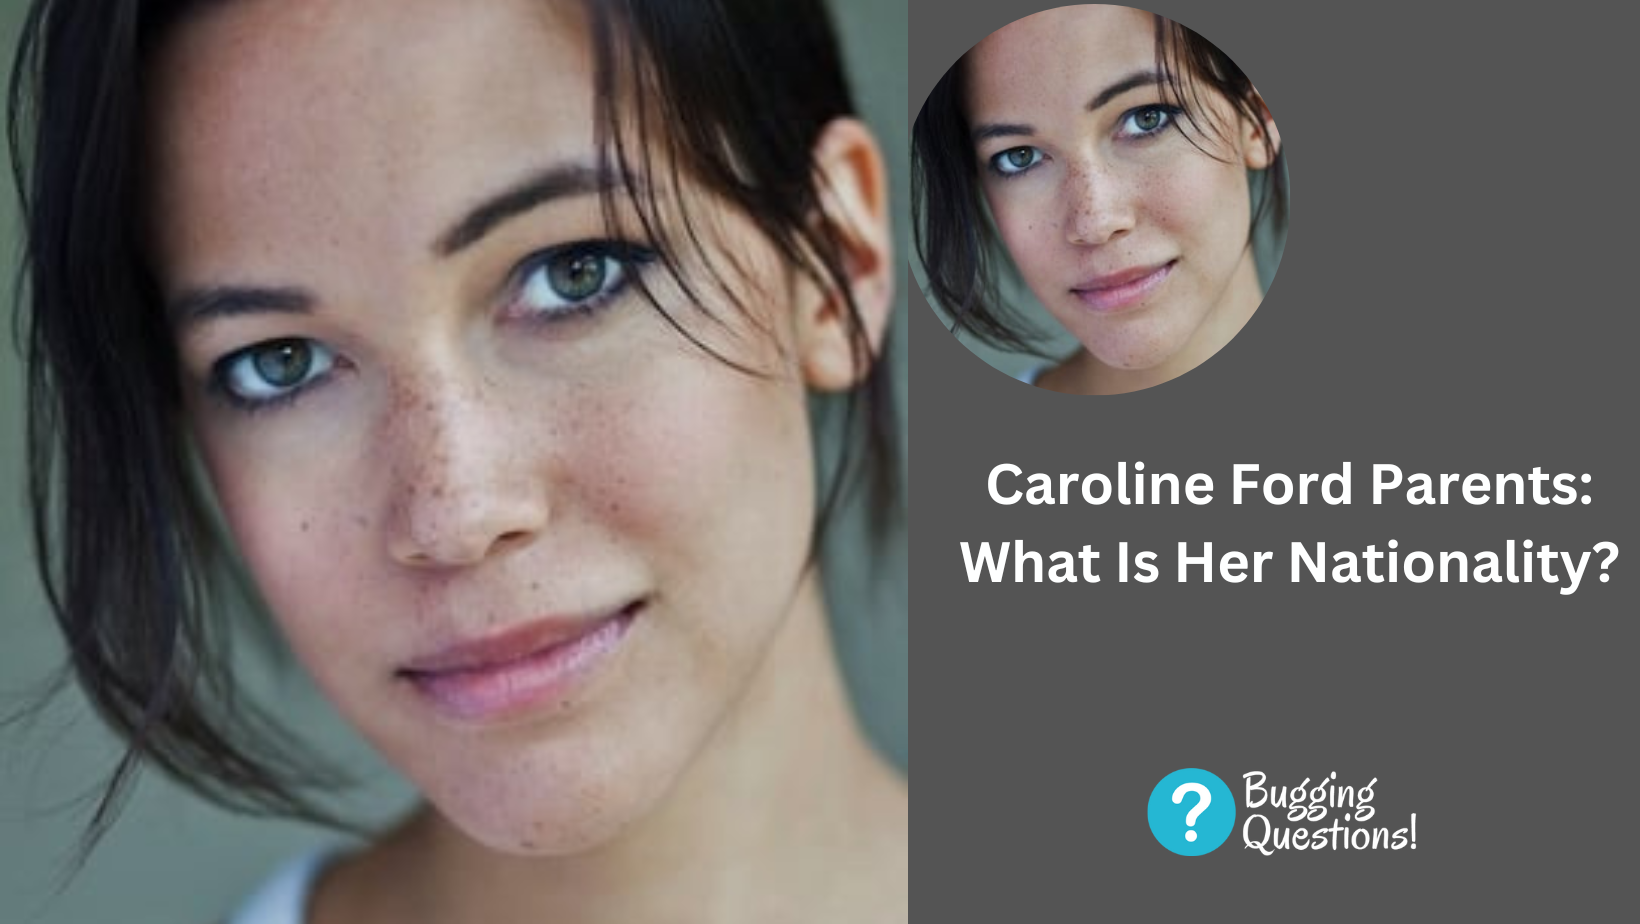 Caroline Ford Parents: What Is Her Nationality?